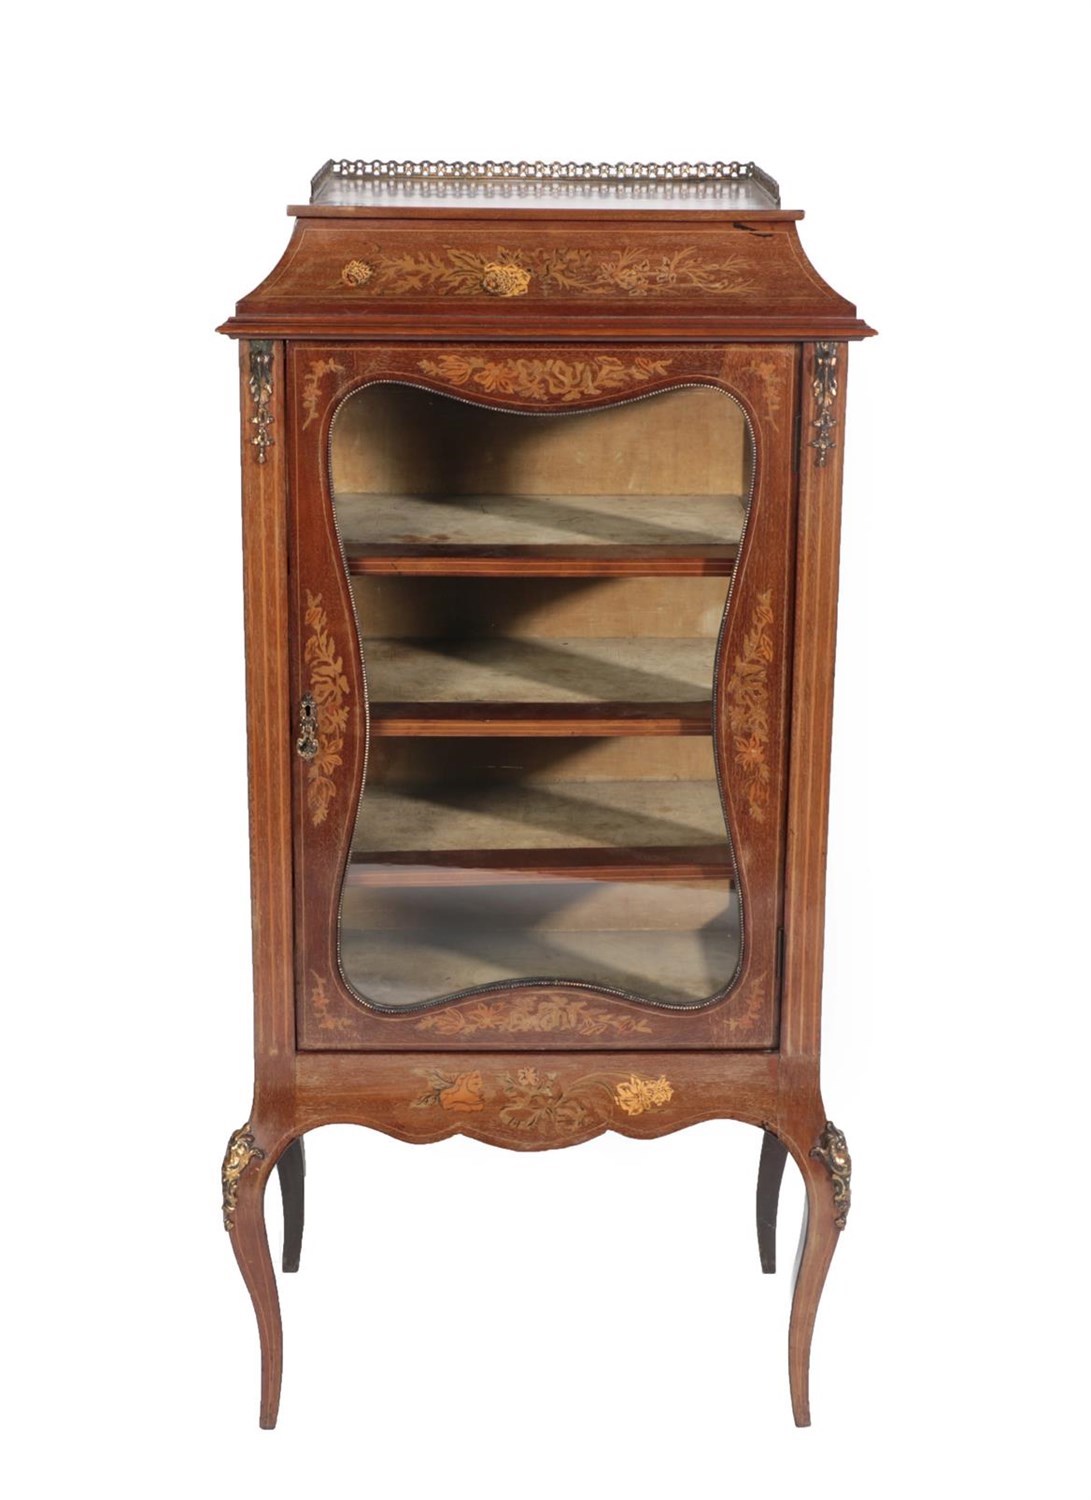 Lot 525 - A Late Victorian Mahogany and Marquetry Inlaid Vitrine, late 19th century, inlaid with flowers,...